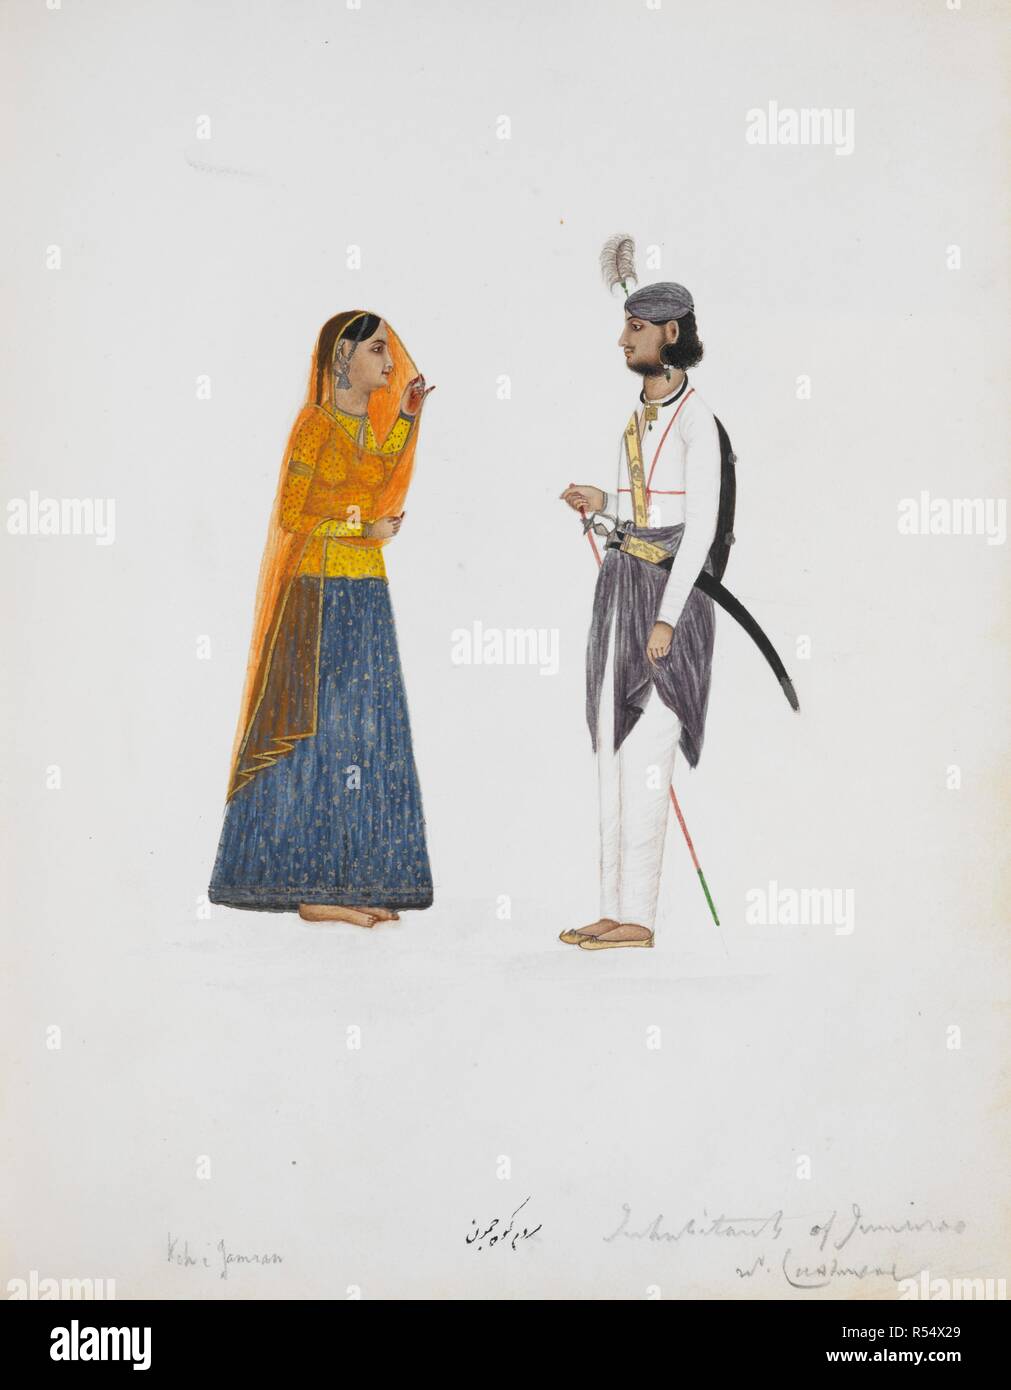 Man and woman from Jammu. 1838 - 1839 Punjab style. Pencil watercolour. Inscribed in Persian characters: â€˜Mardum i kuh i Jaamun;â€™ in English: â€˜Inhabitants of Jummoo nr. Cashmere.â€™. Source: Add.Or.1373. Language: Persian. Author: ANON. Stock Photo